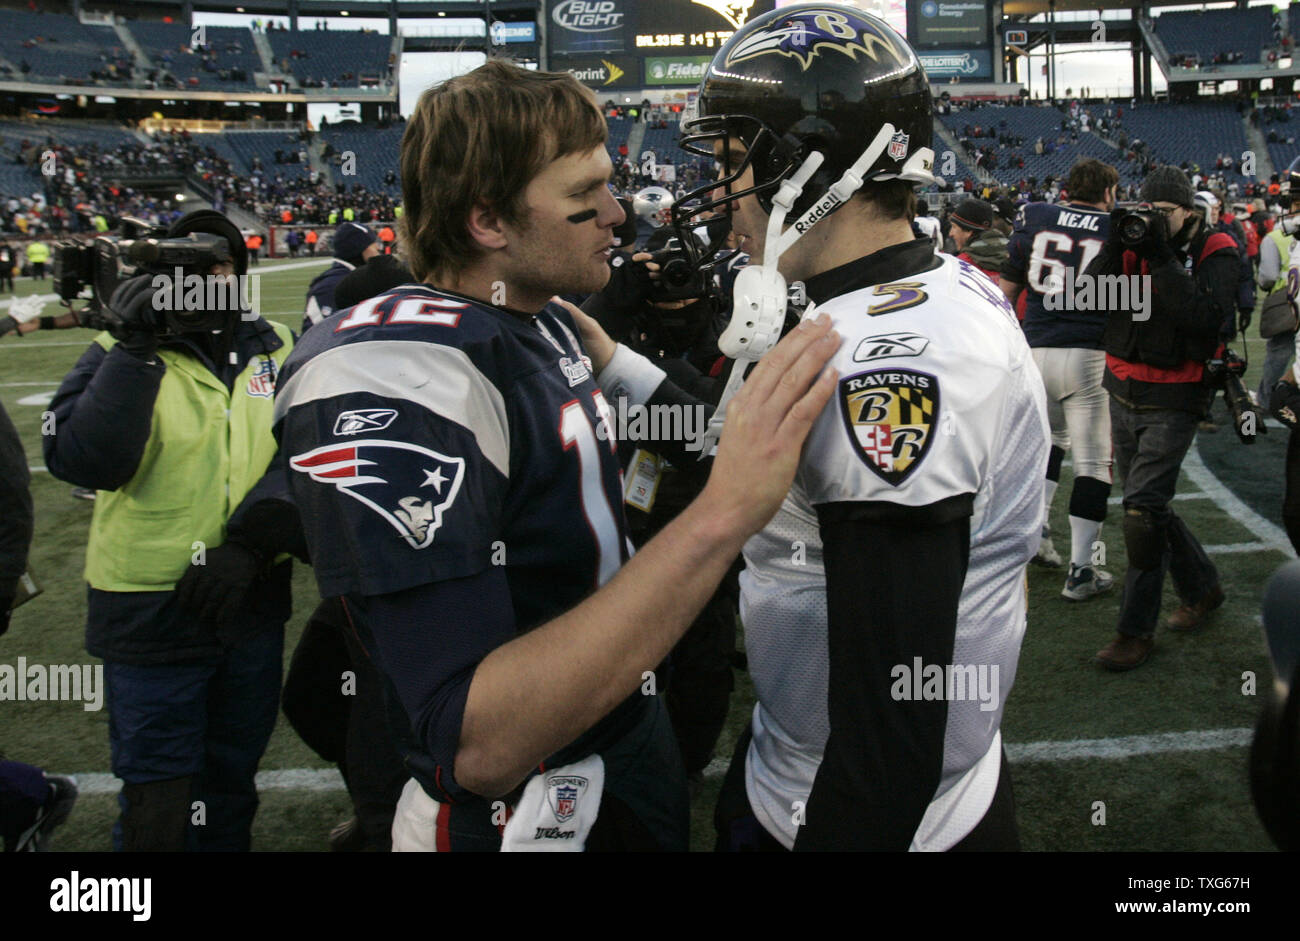 New England Patriots quarterback Tom Brady (12) shakes hands with Baltimore Ravens quarterback Joe Flacco (5) after the AFC Wildcard game at Gillette Stadium in Foxboro, Massachusetts on January 10, 2010.  The Ravens defeated the Patriots 33-14.   UPI/Matthew Healey Stock Photo